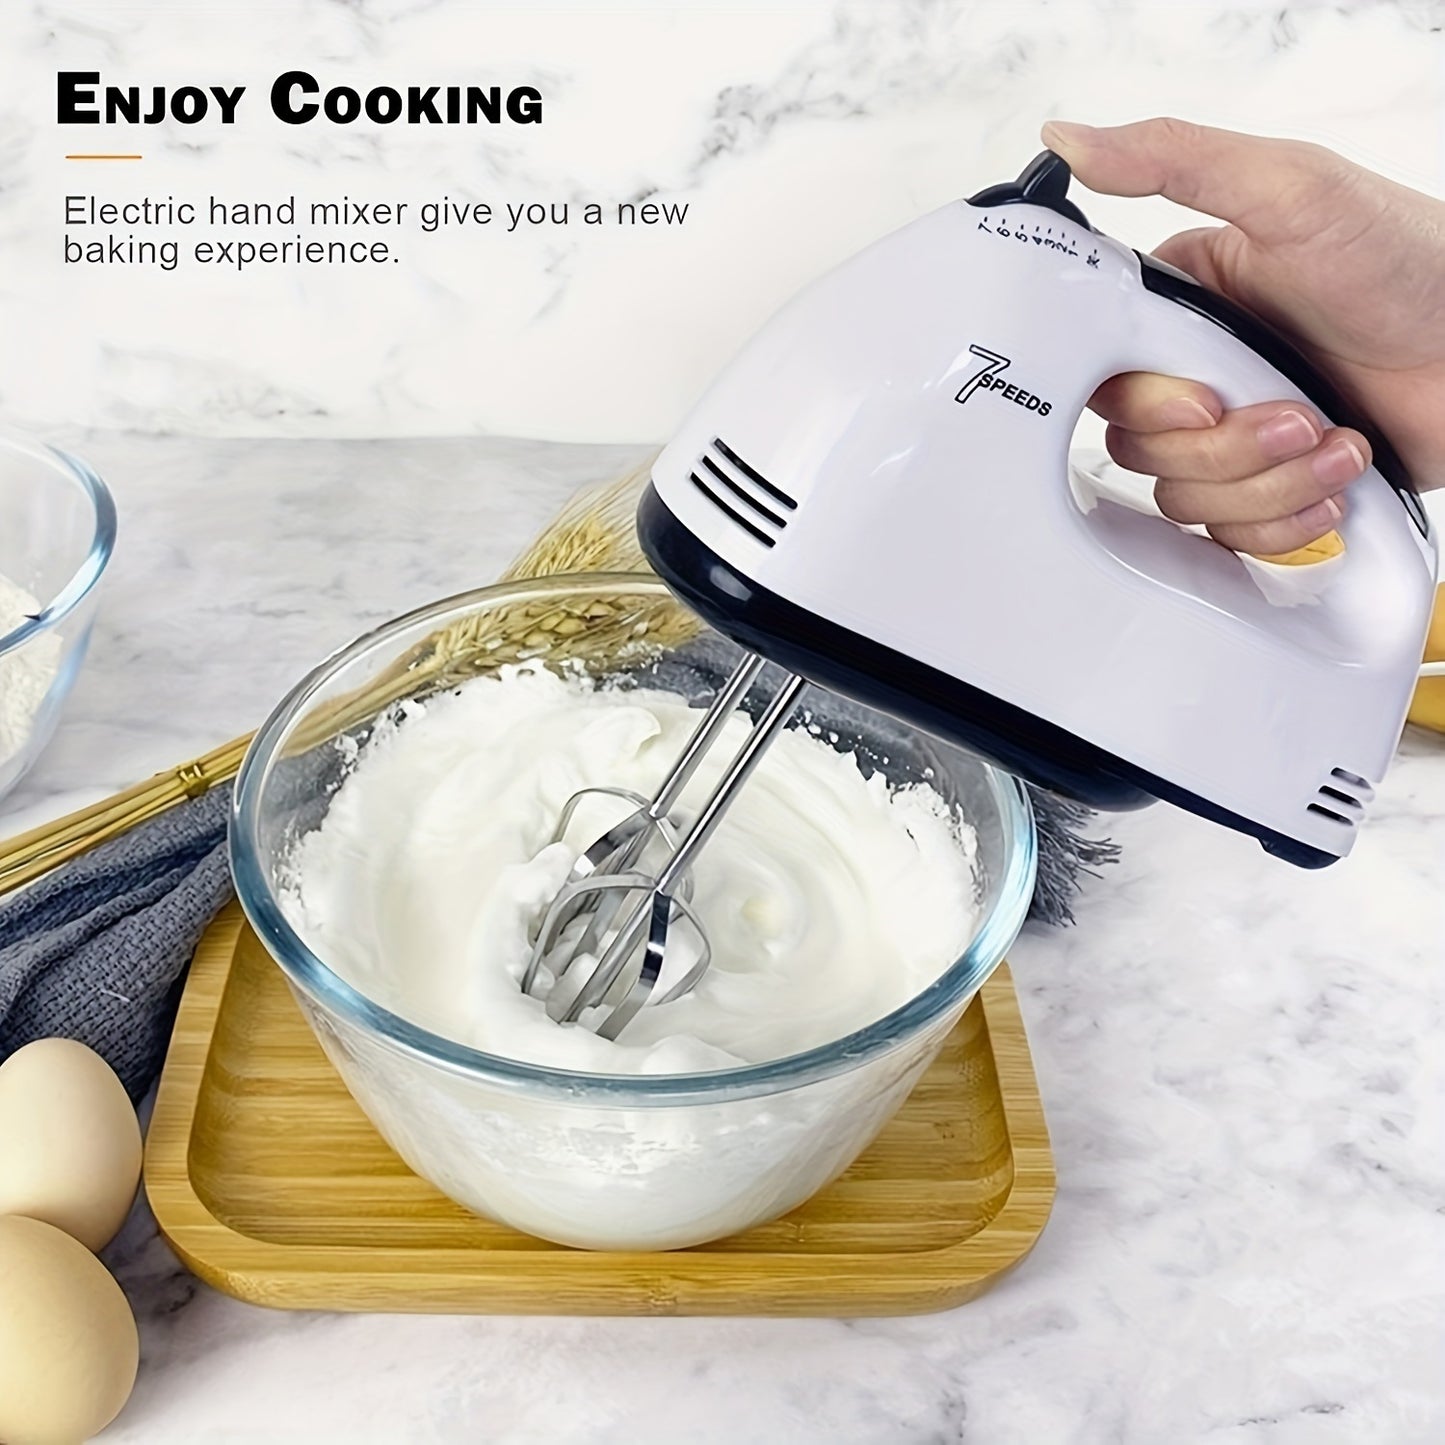 1pc 7 Speeds Electric Hand Mixer; Household Portable Powerful Handheld Electric Mixer; Hand-held Egg Beater; Small Whipping Cream Mixer For Cake; Baking; Cooking; Dessert